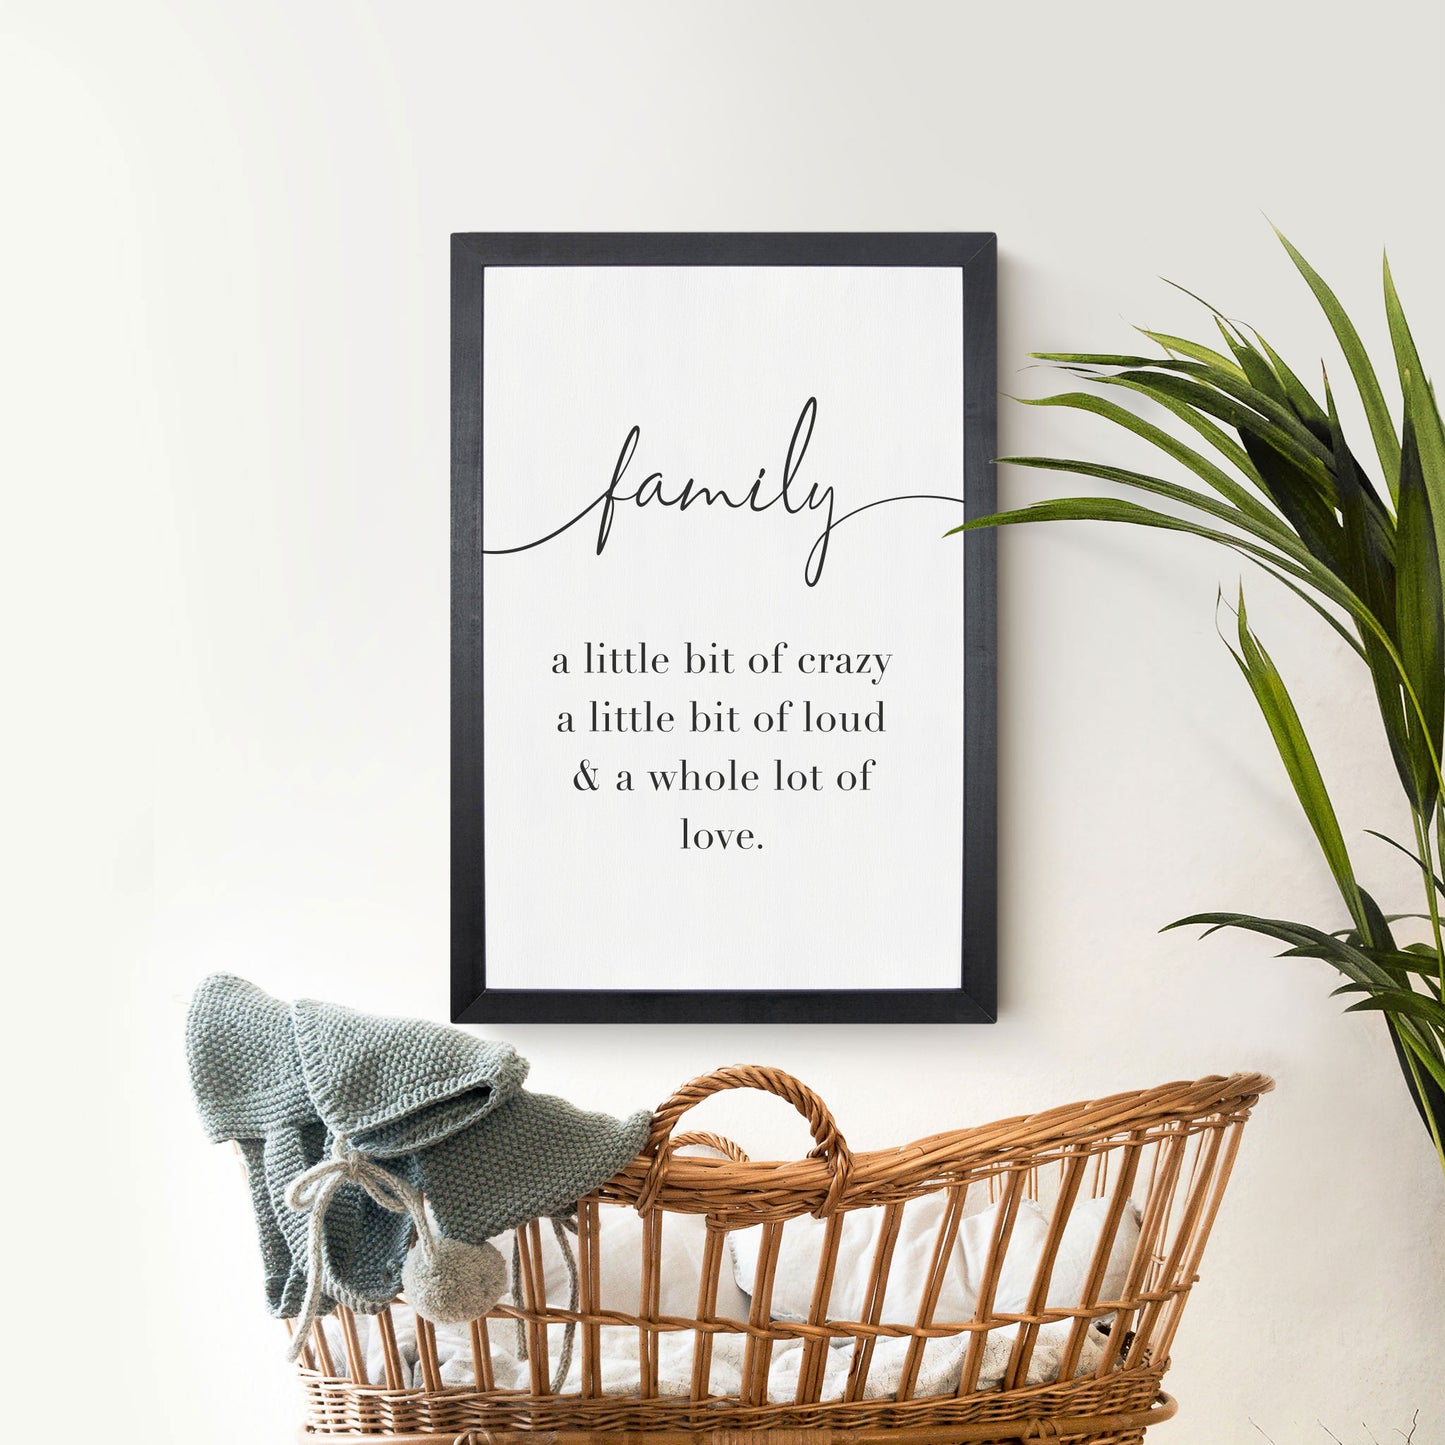 A Whole Lot of Love Family Wooden Sign